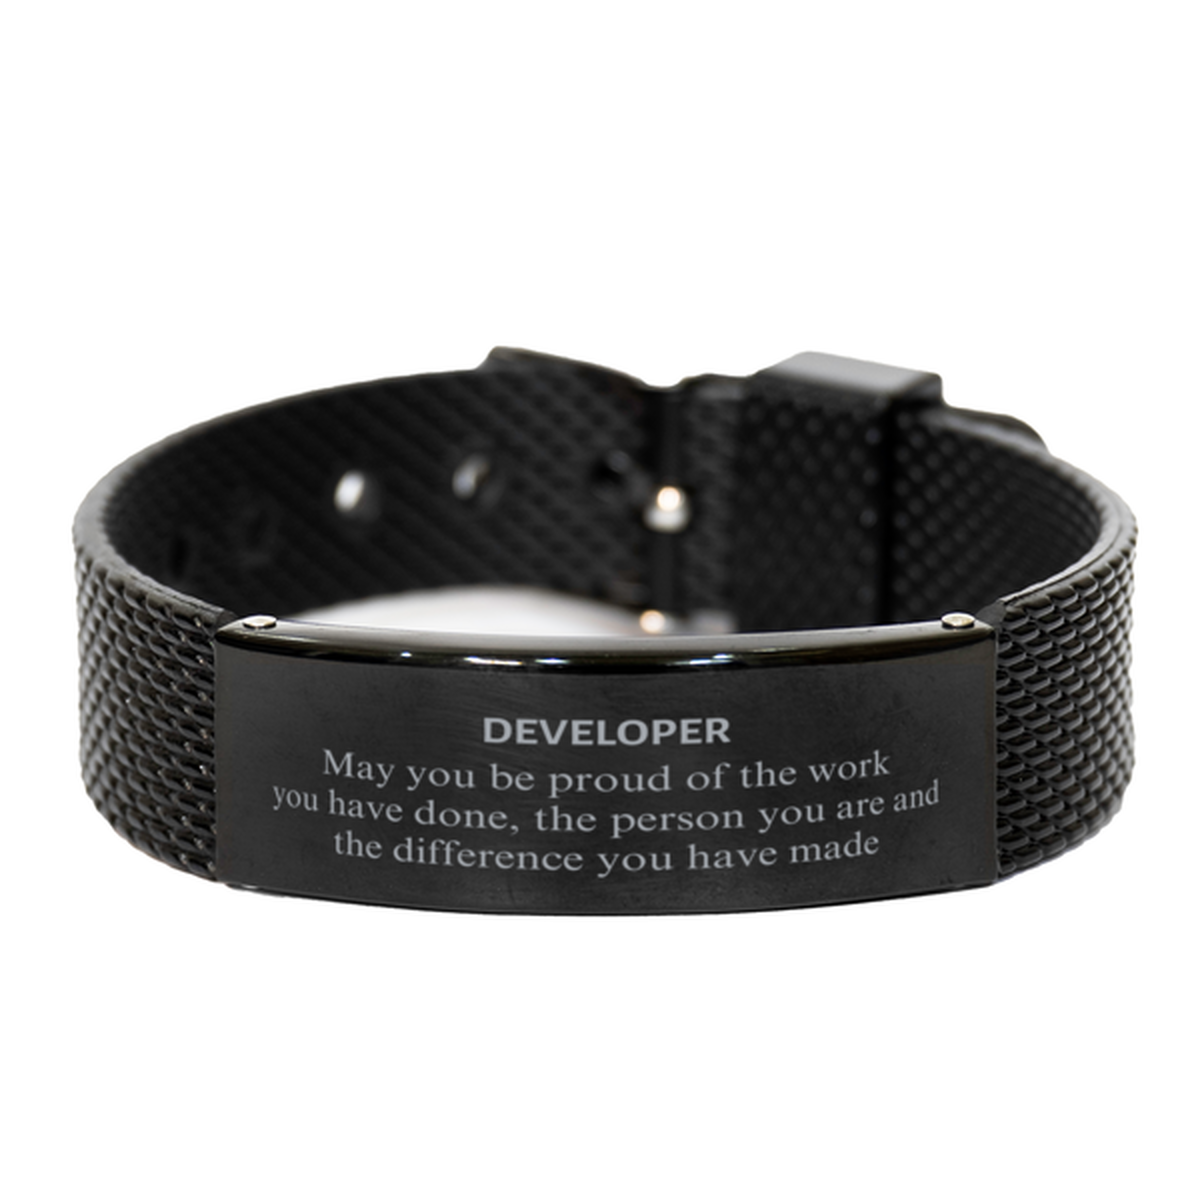 Developer May you be proud of the work you have done, Retirement Developer Black Shark Mesh Bracelet for Colleague Appreciation Gifts Amazing for Developer